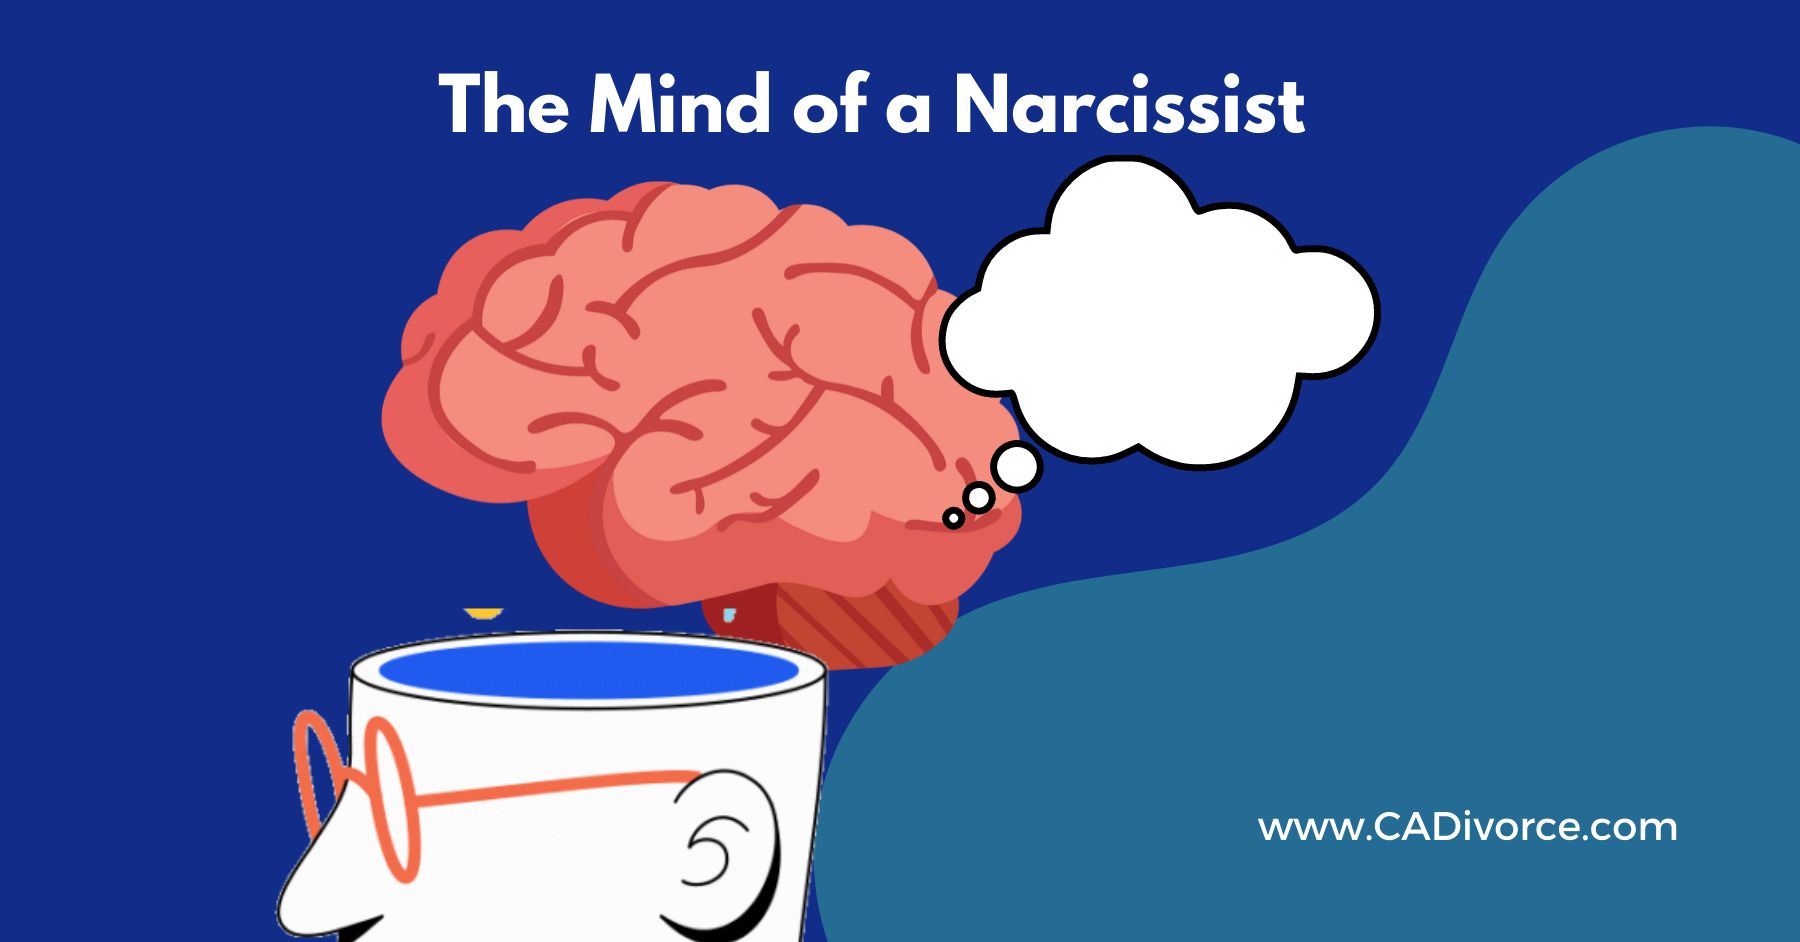 The Mind of a Narcissist